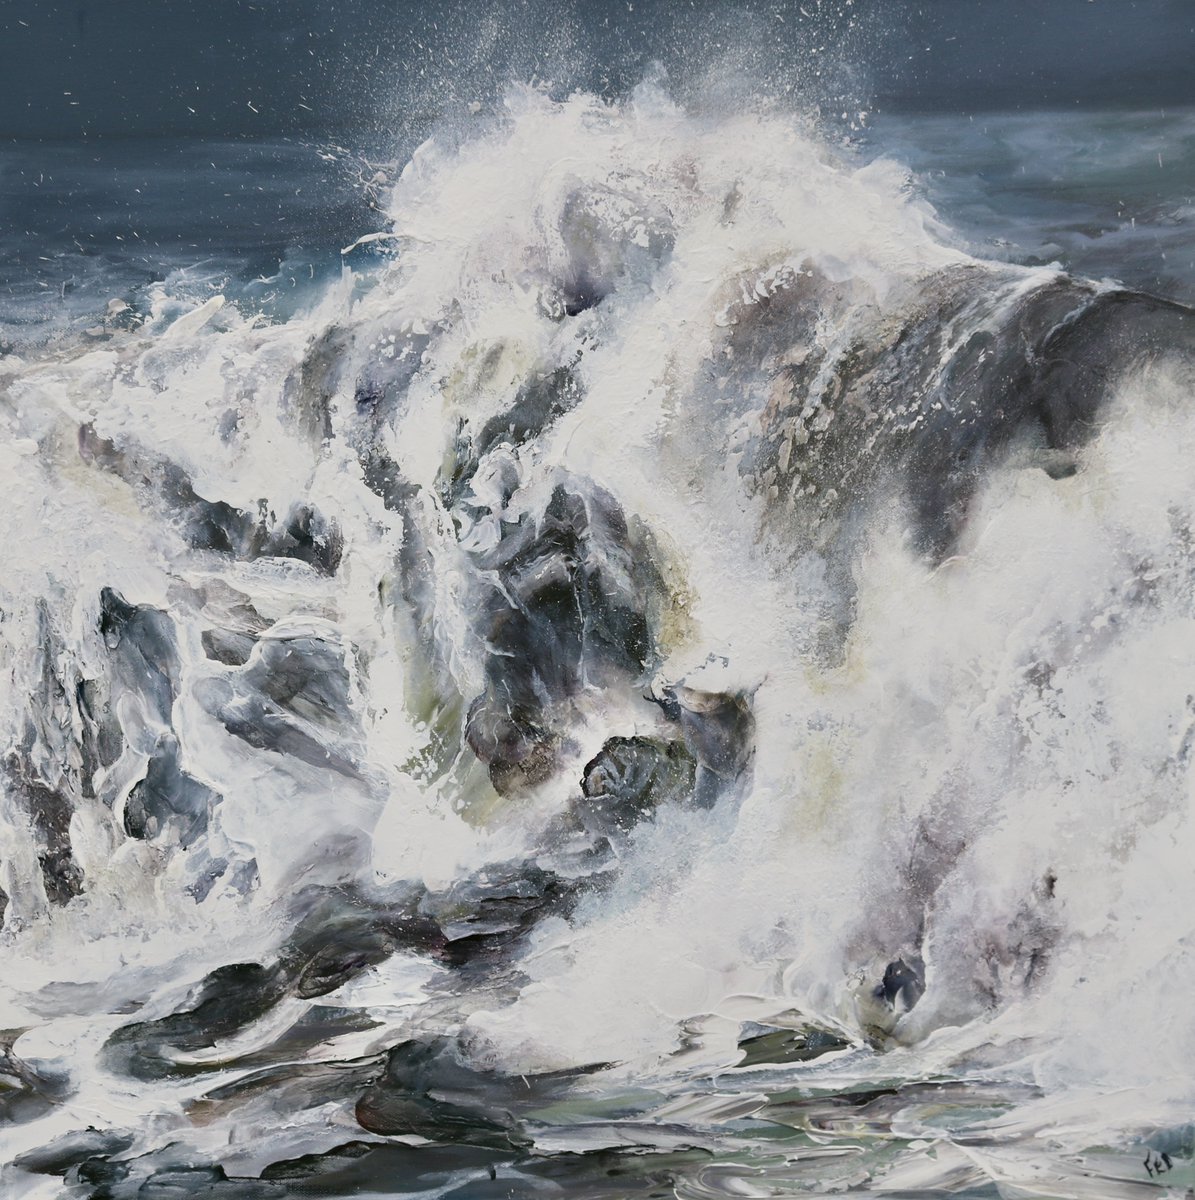 cardiffandvale.art/2023/06/22/coa… @CavuhbArts Currently showing some coastal inspired pieces with the HeARTh Gallery, Llandough Hospital. The group exhibition explores the healing benefits of wild swimming and a selection of imagery that captures connections with the sea.